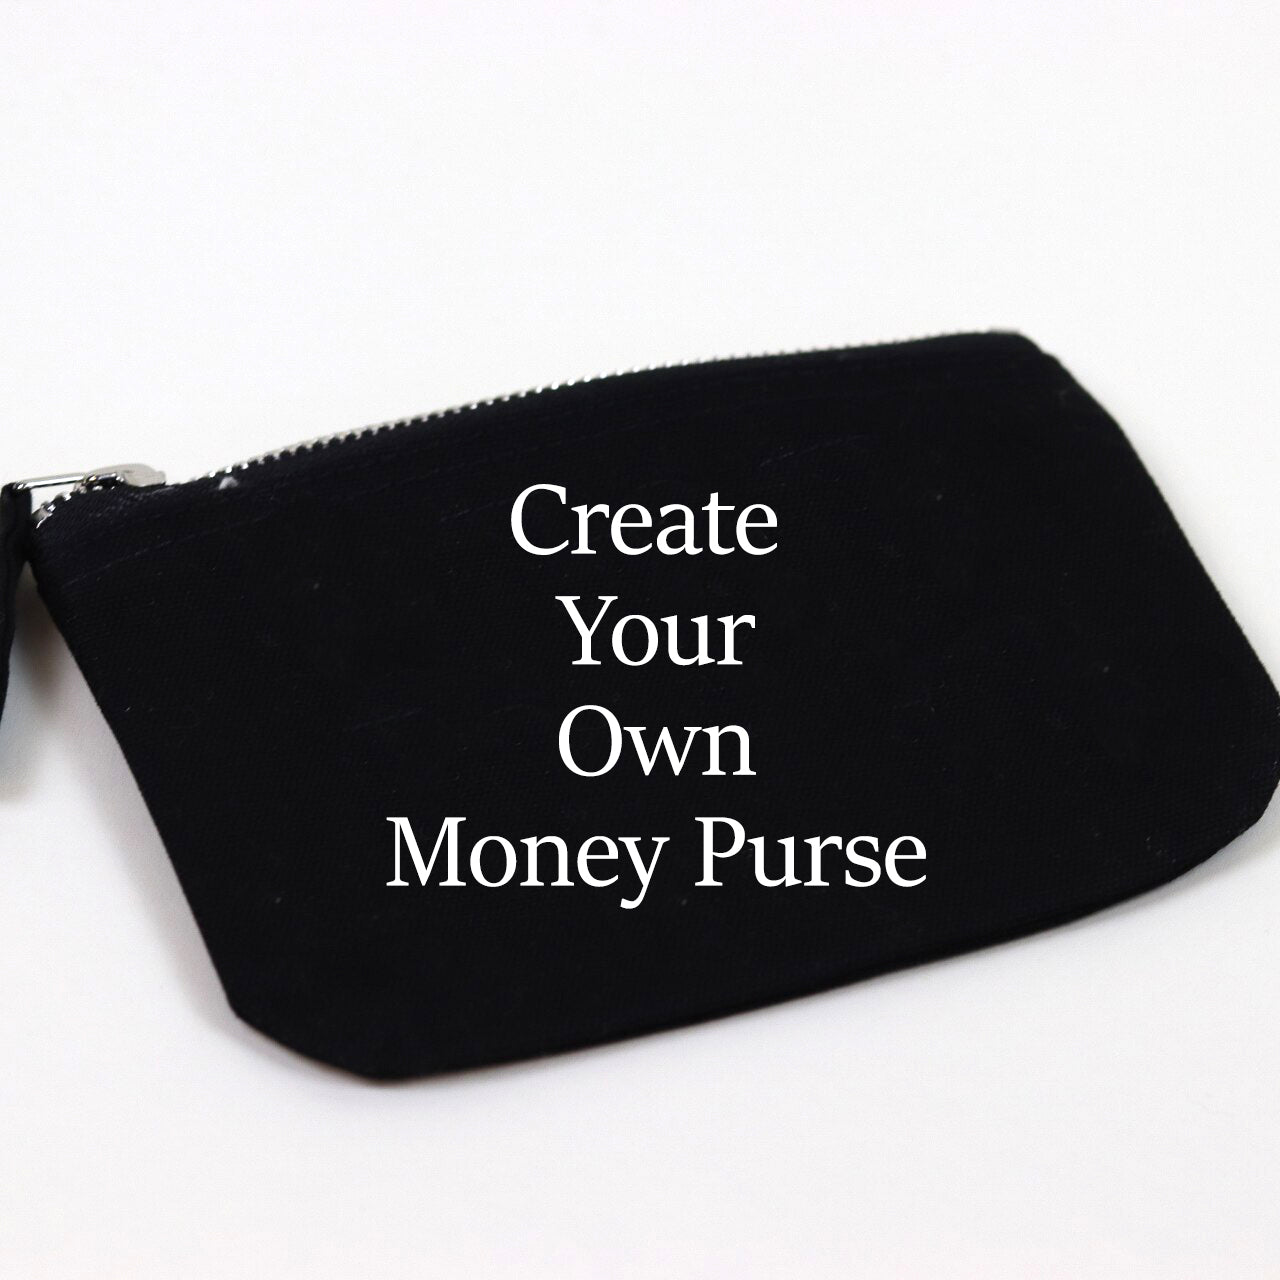 Create Your Own Money Purse